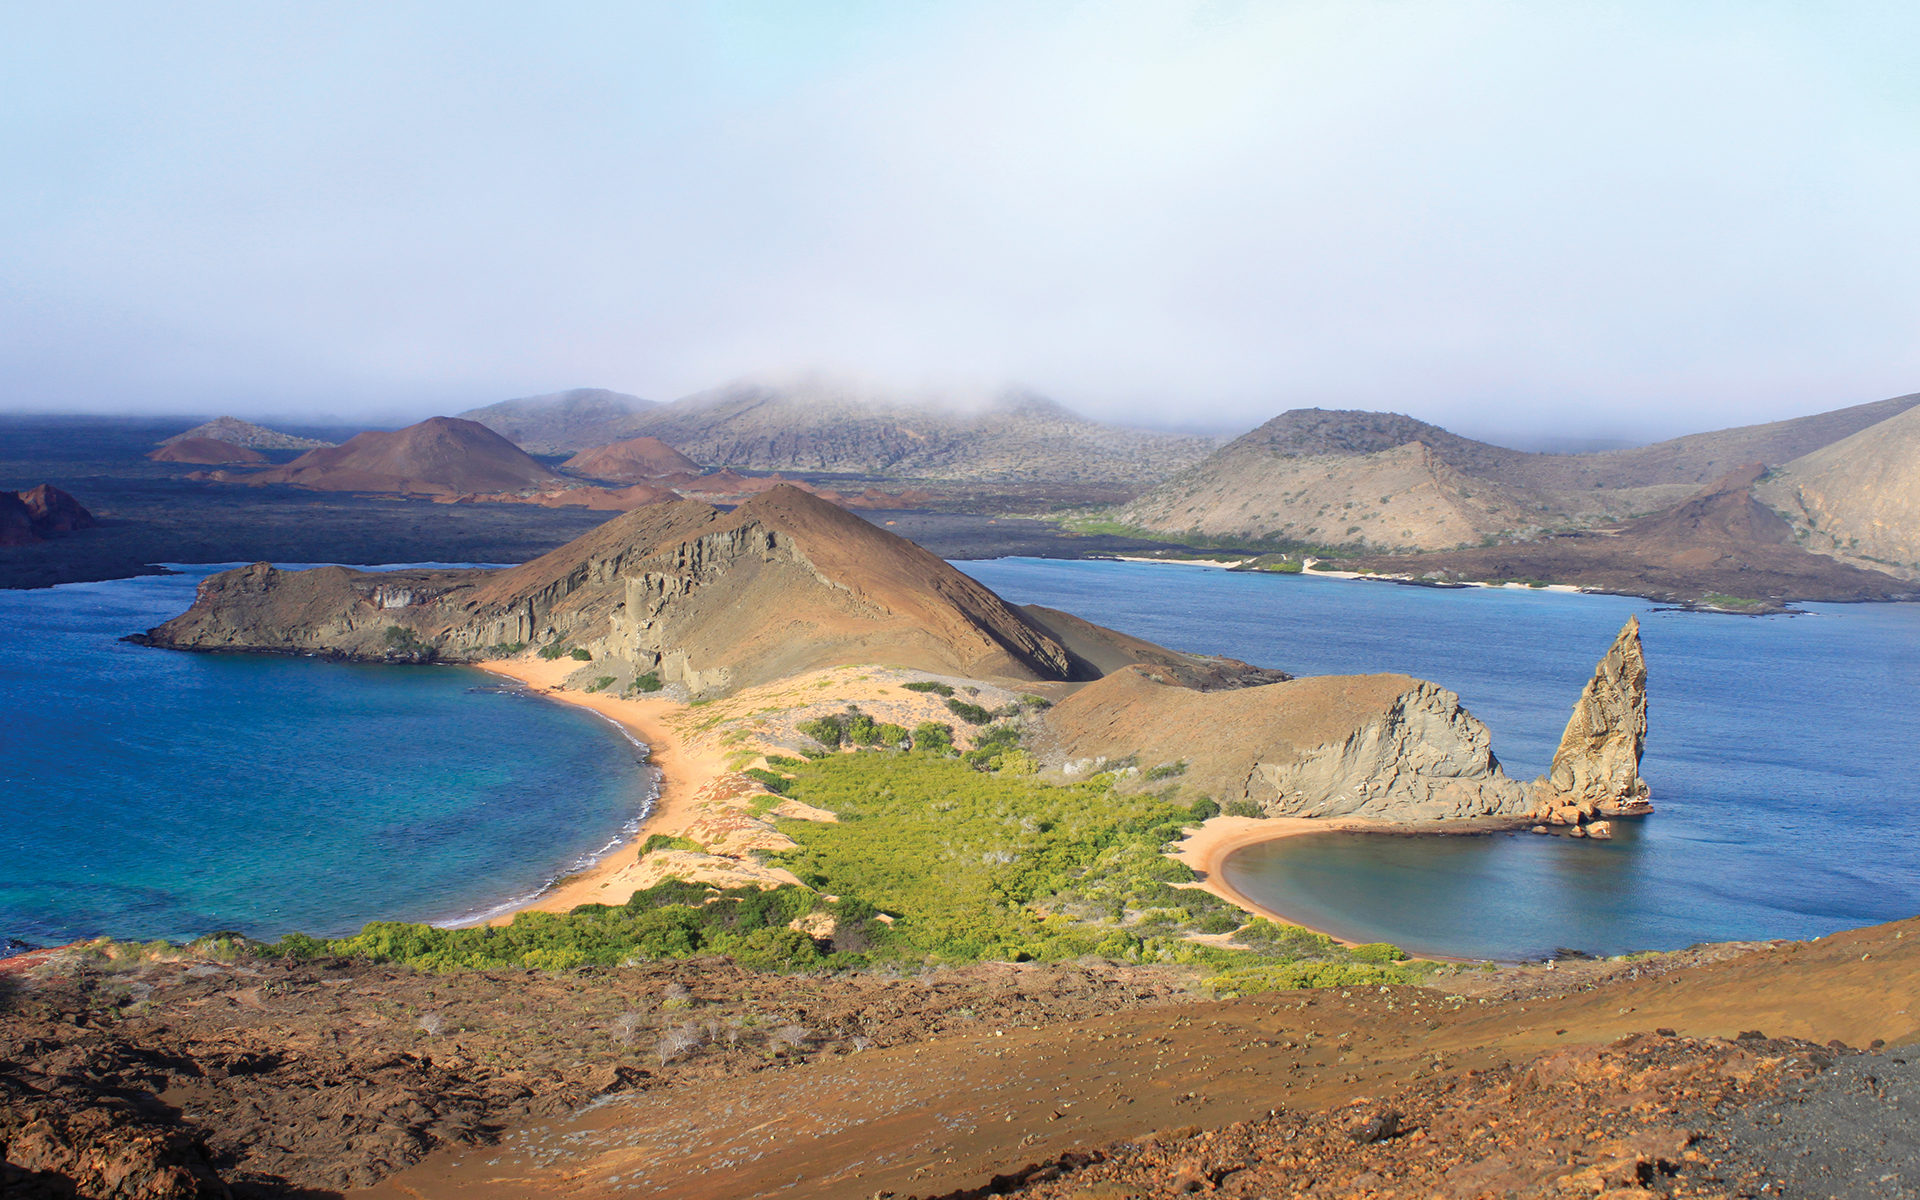 Explore the wonders of the Galápagos Islands